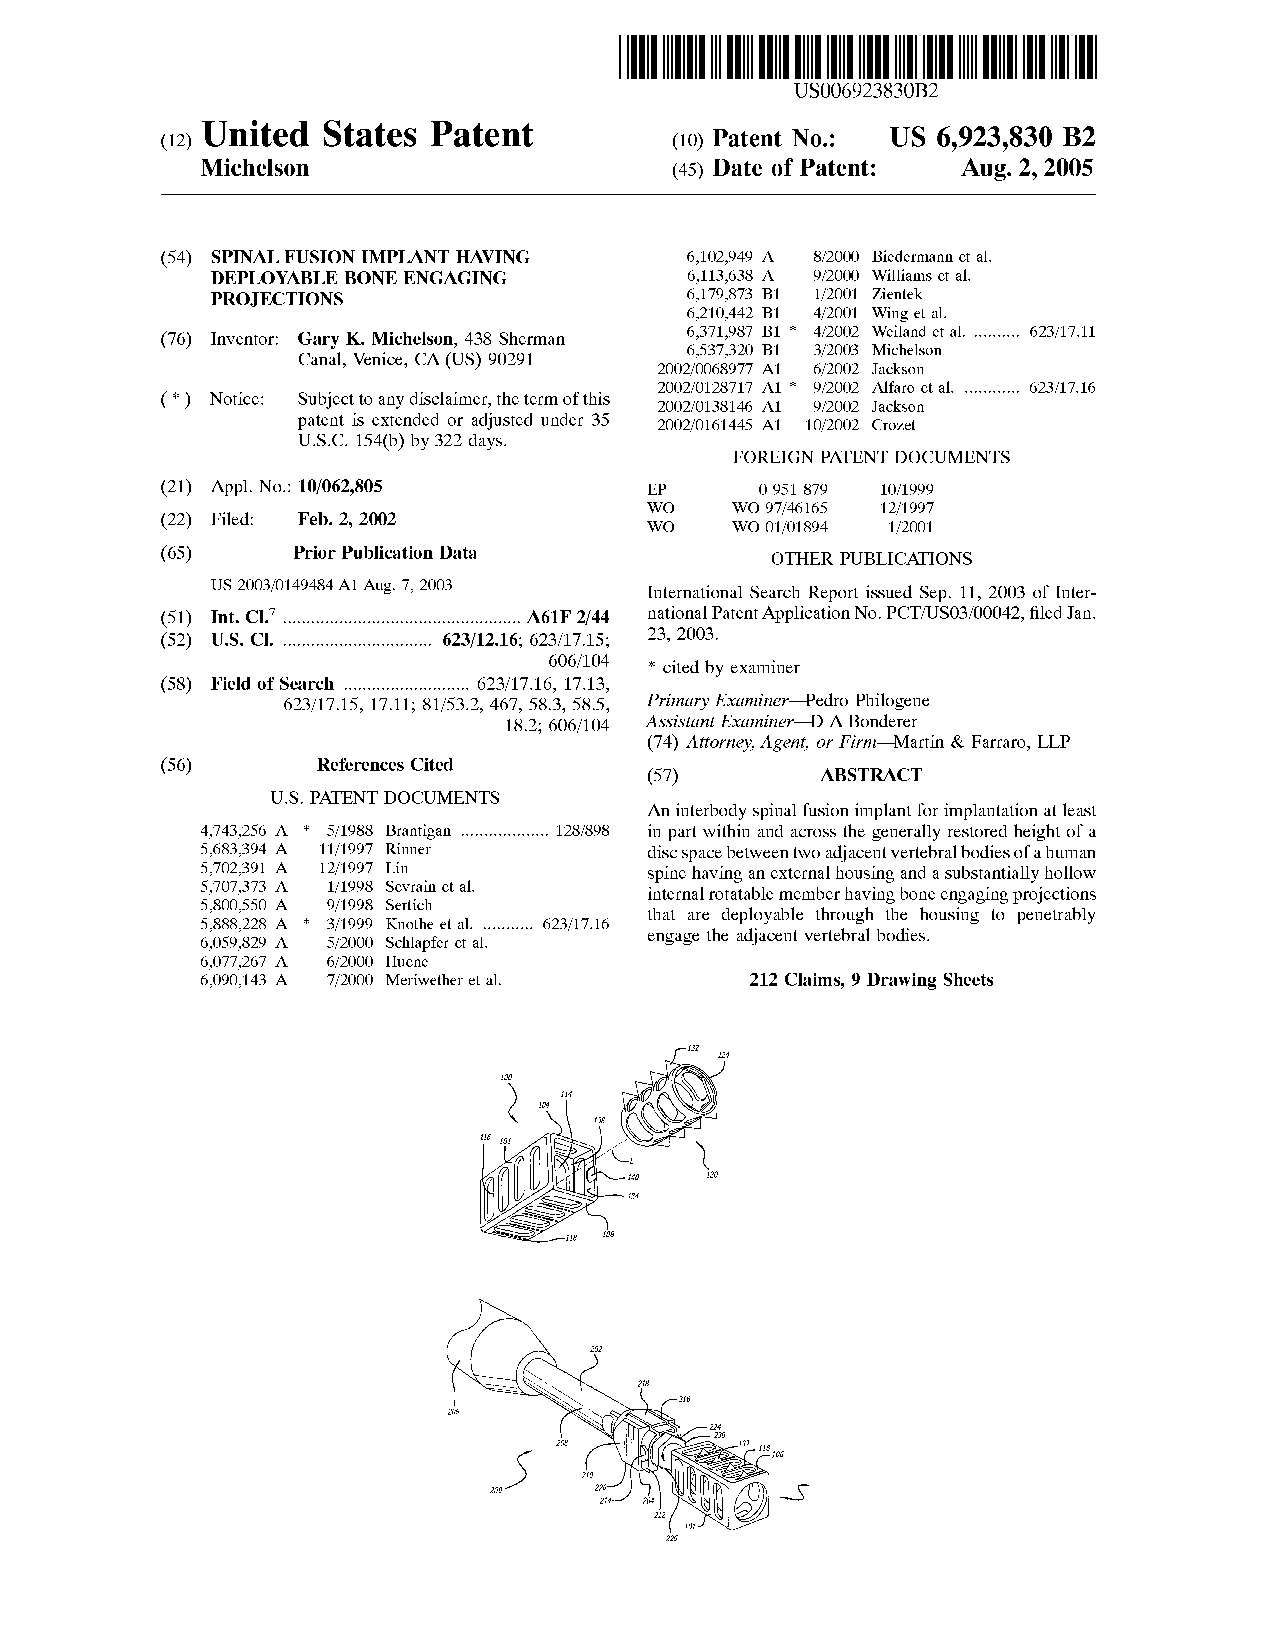 Spinal fusion implant having deployable bone engaging projections - Patent 6,923,830